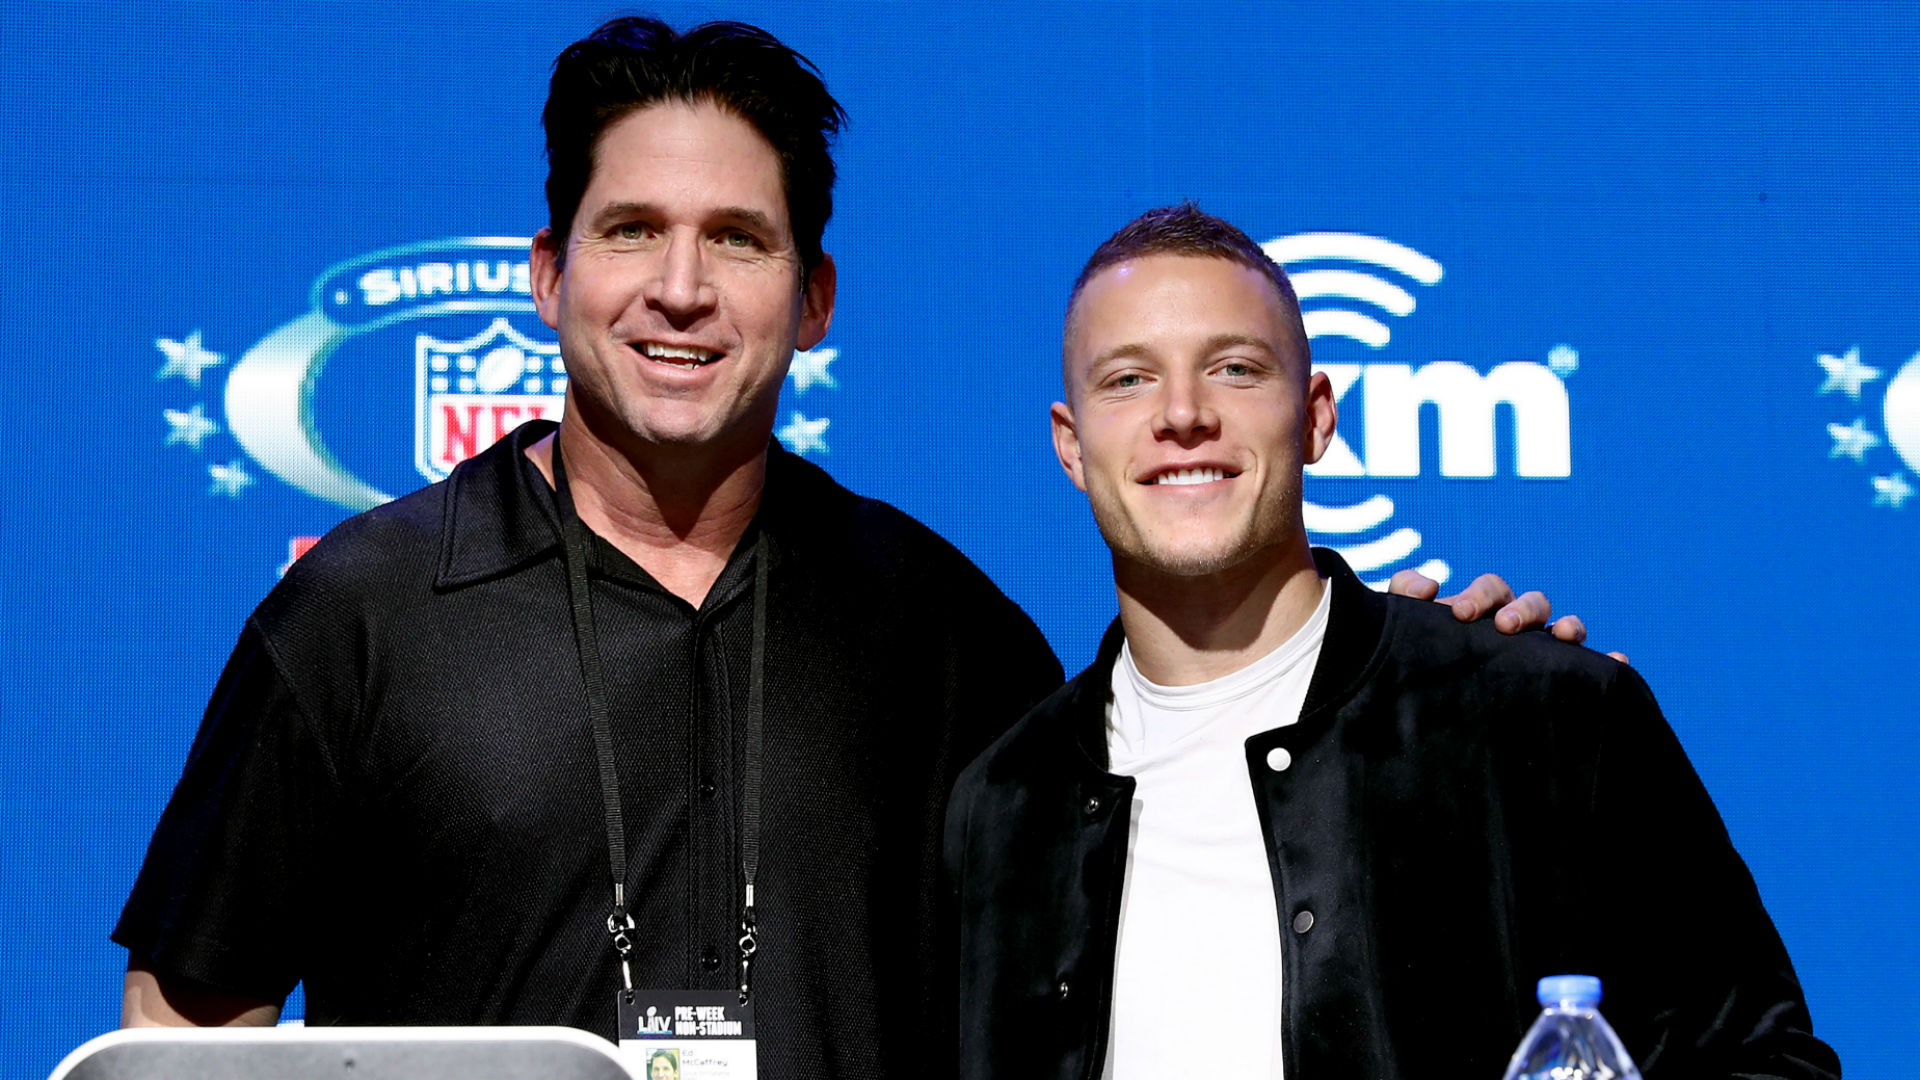 NFL News: The Christian McCaffrey And Luke McCaffrey Legacy, Brothers Making Waves in the NFL, Continuing a Family Tradition